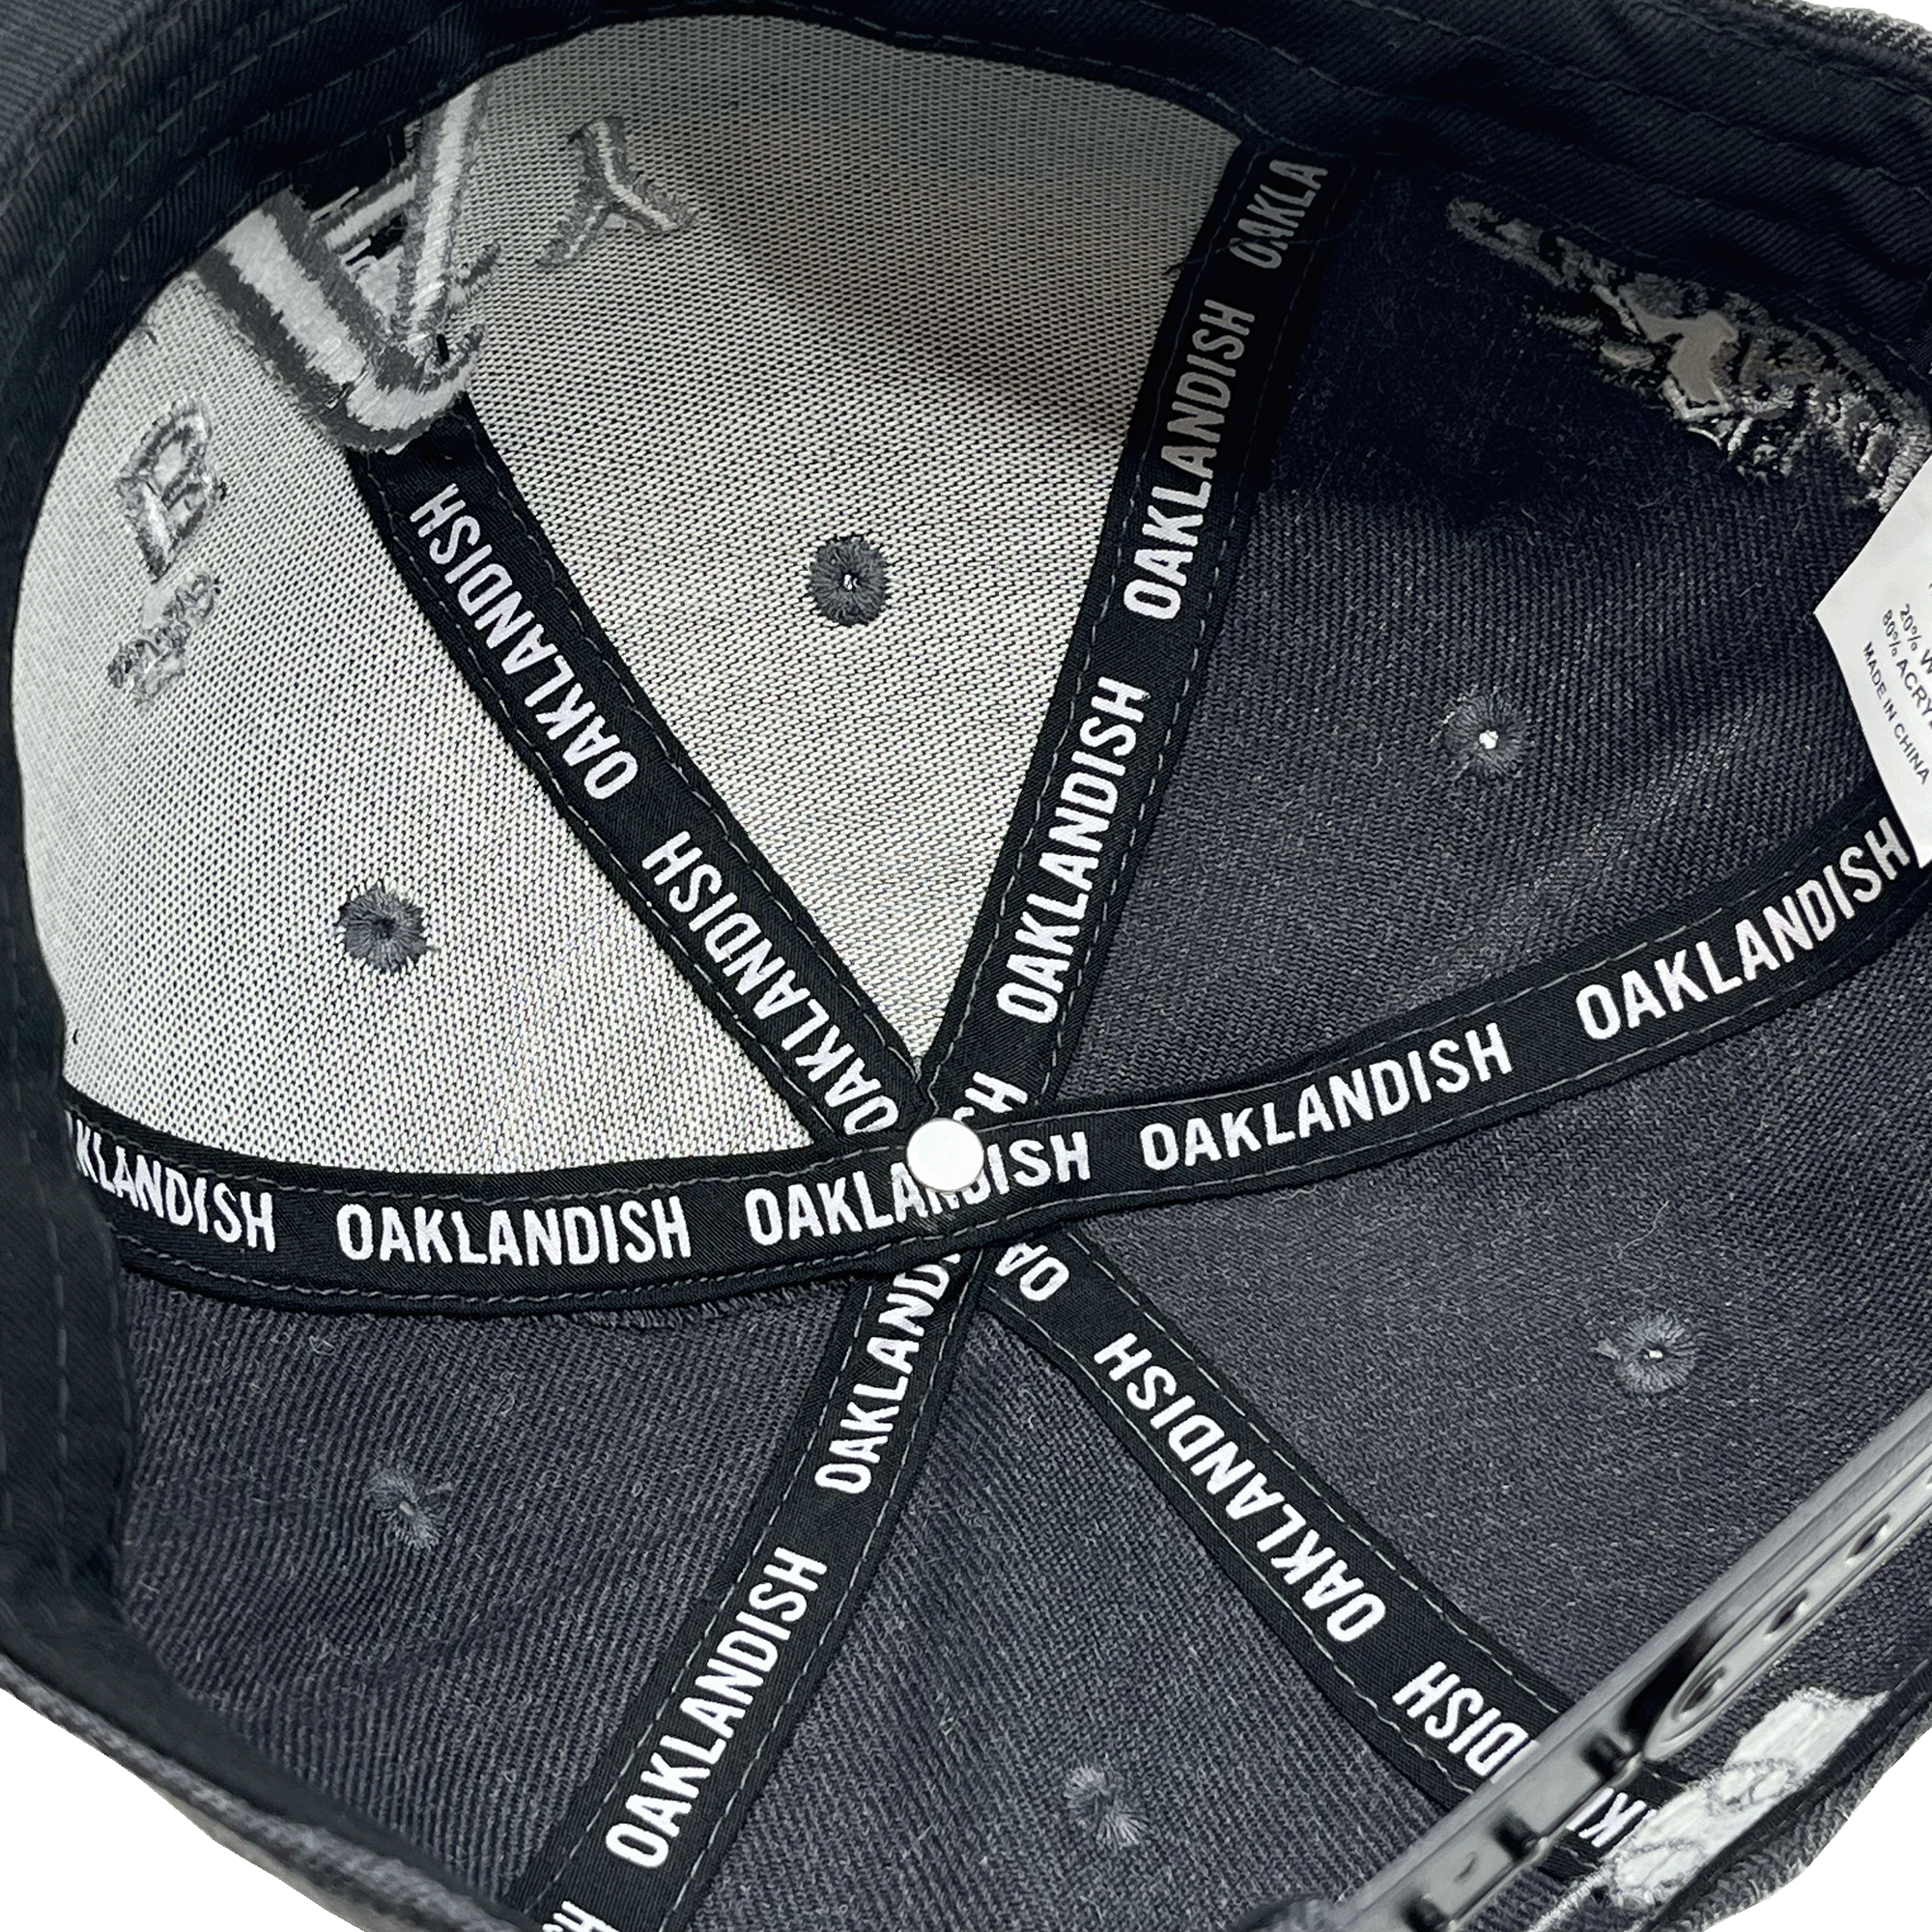 Inside crown view of black taping with Oaklandish wordmark on repeat inside a charcoal cap.